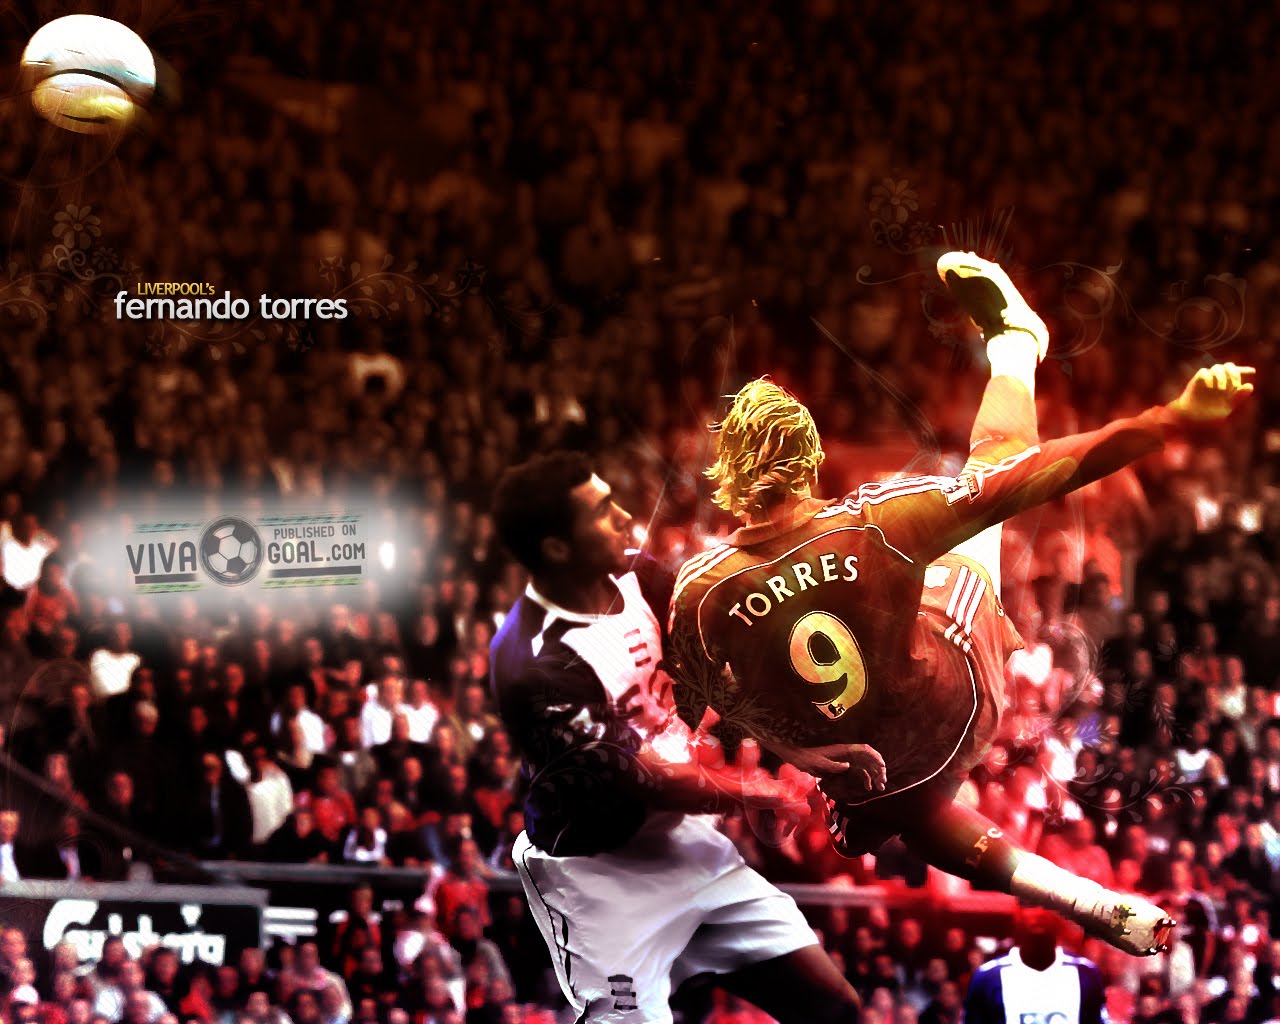 world cup,world cup 2010, South Africa, football, soccer, liverpool wallpaper 2010 Tores 